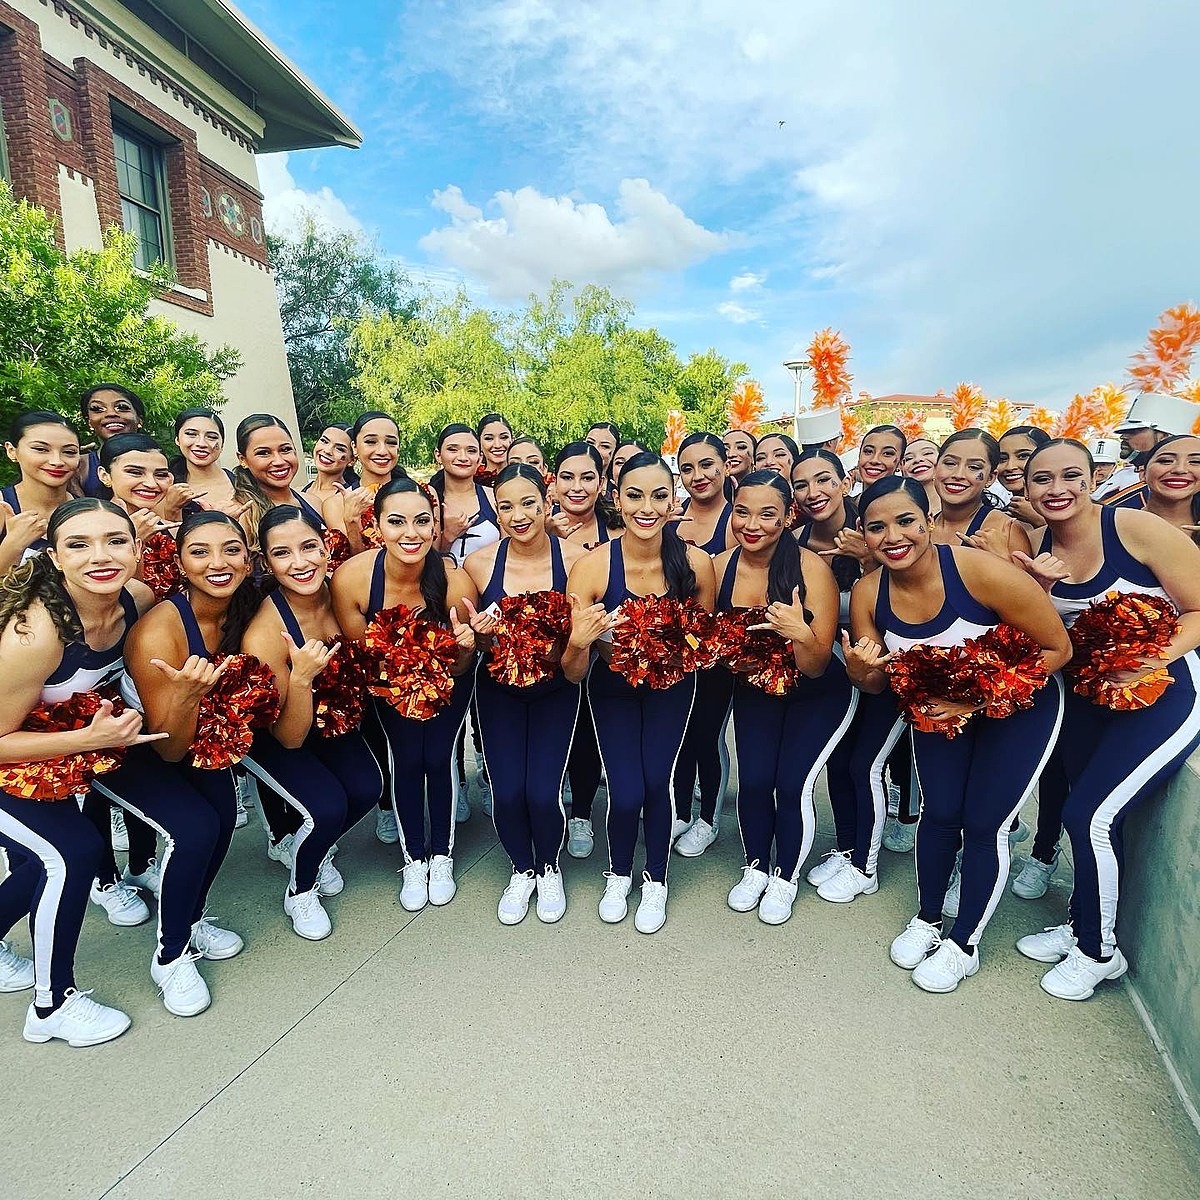 UTEP Cheer, Dance Teams to Perform in Macy’s Thanksgiving Parade